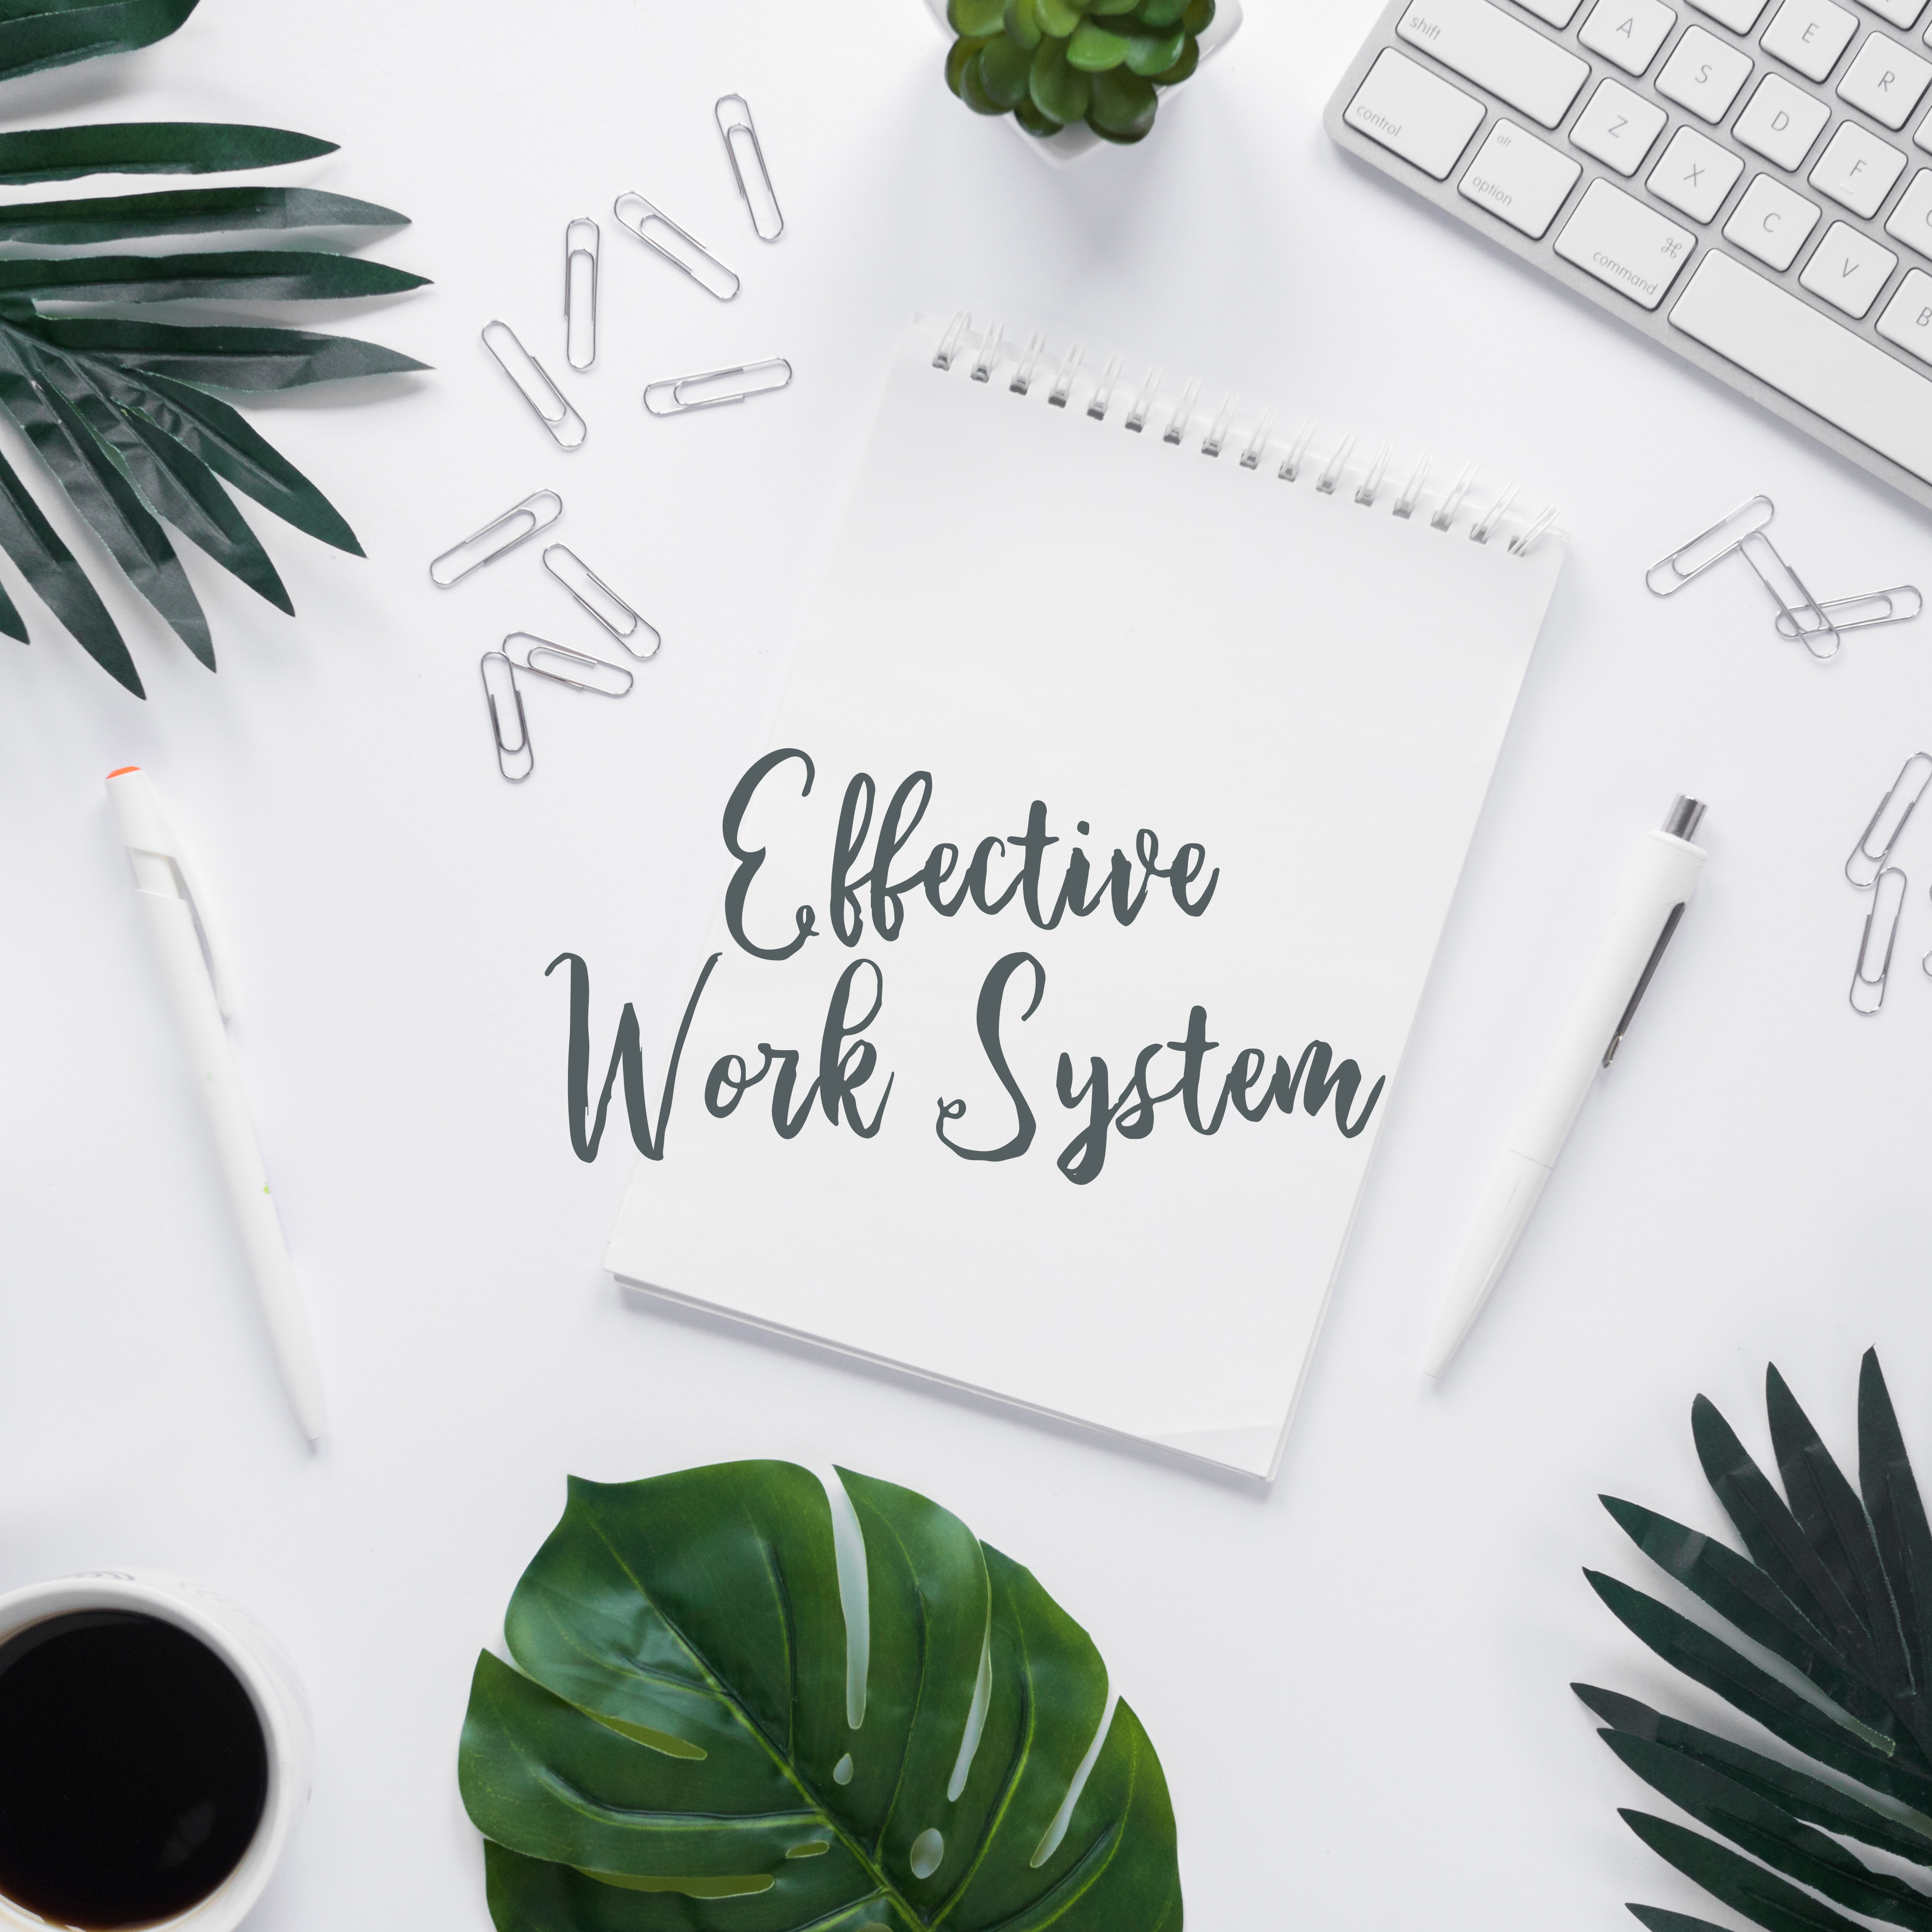 Effective Work System - Ambient Melodies Designed for Mental Labor, Learning and Creative Works, Music for Offices, Companies, Corporations and other Workplaces